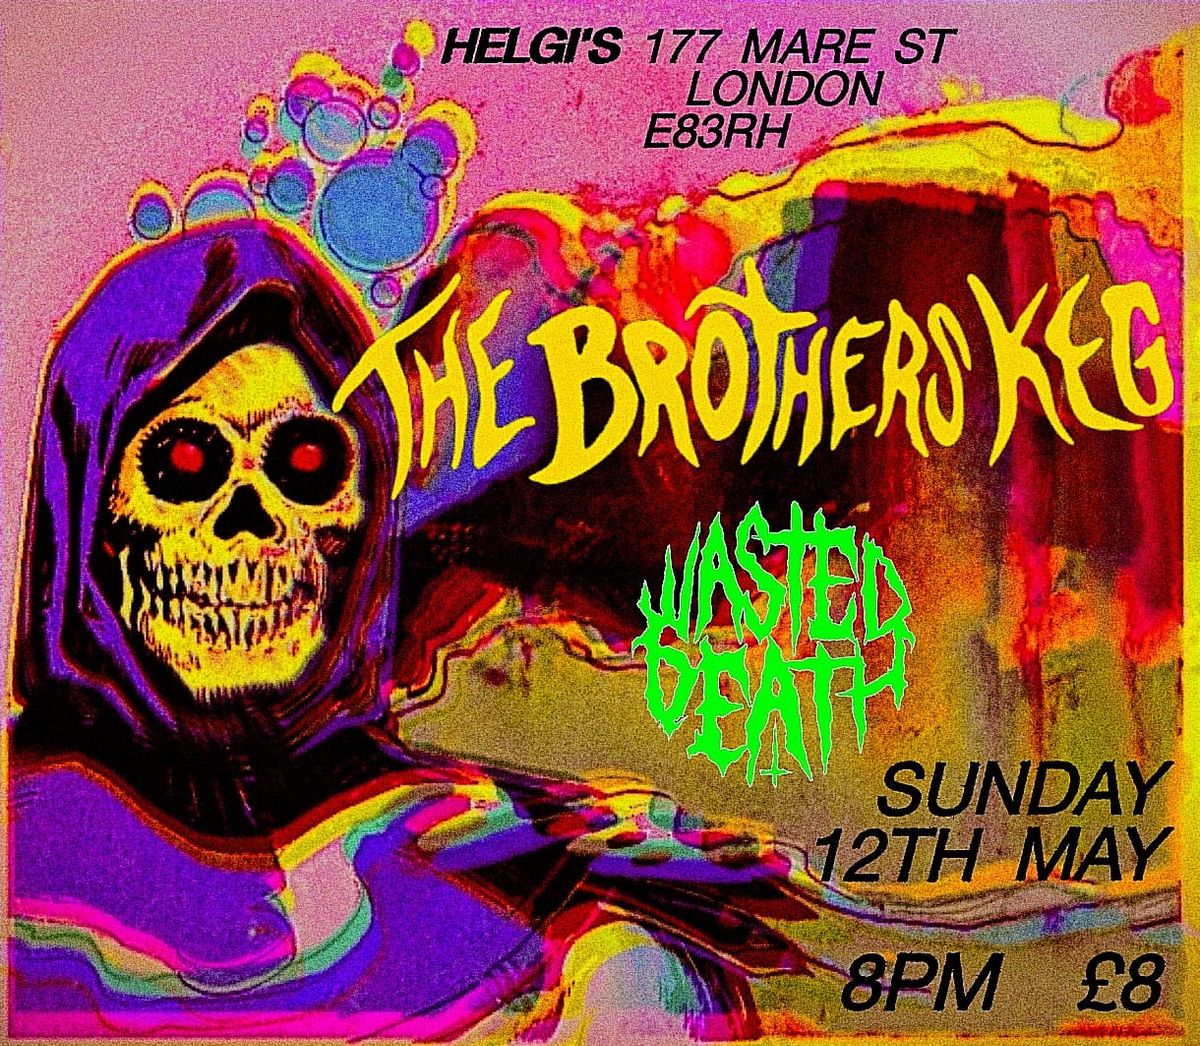 THE BROTHERS KEG + WASTED DEATH